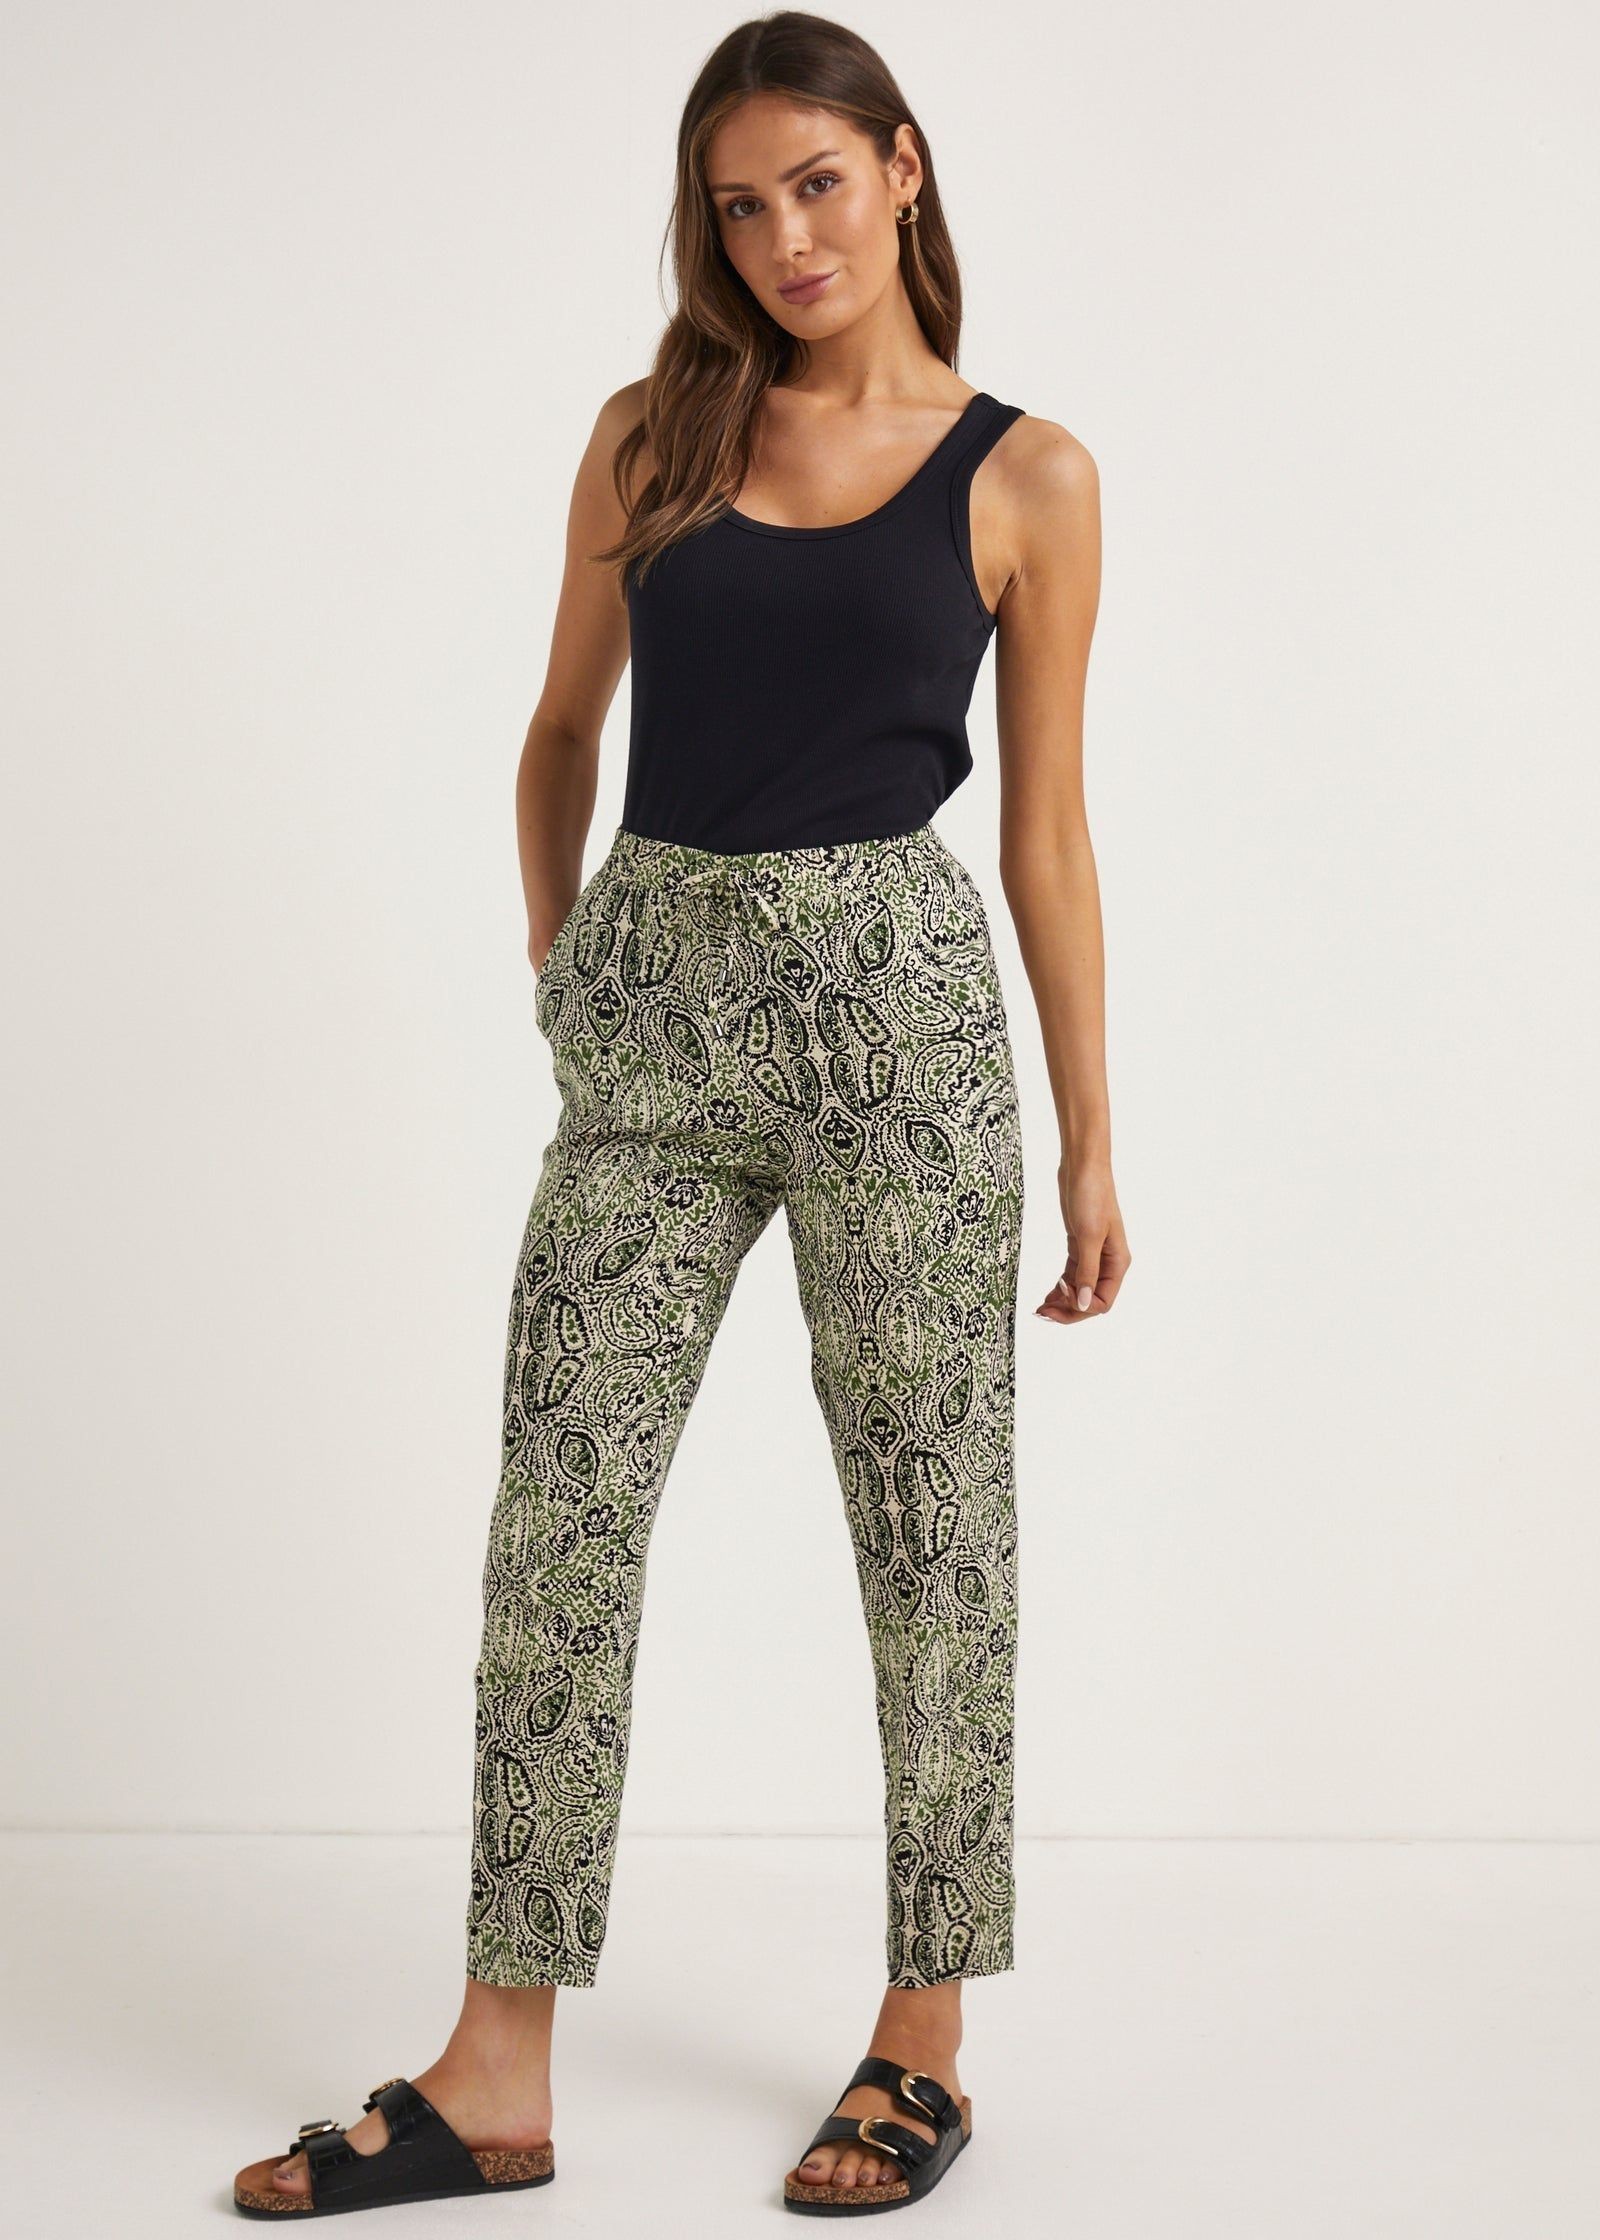 Buy Womens Bottoms at Lowest Price from Matalan Oman